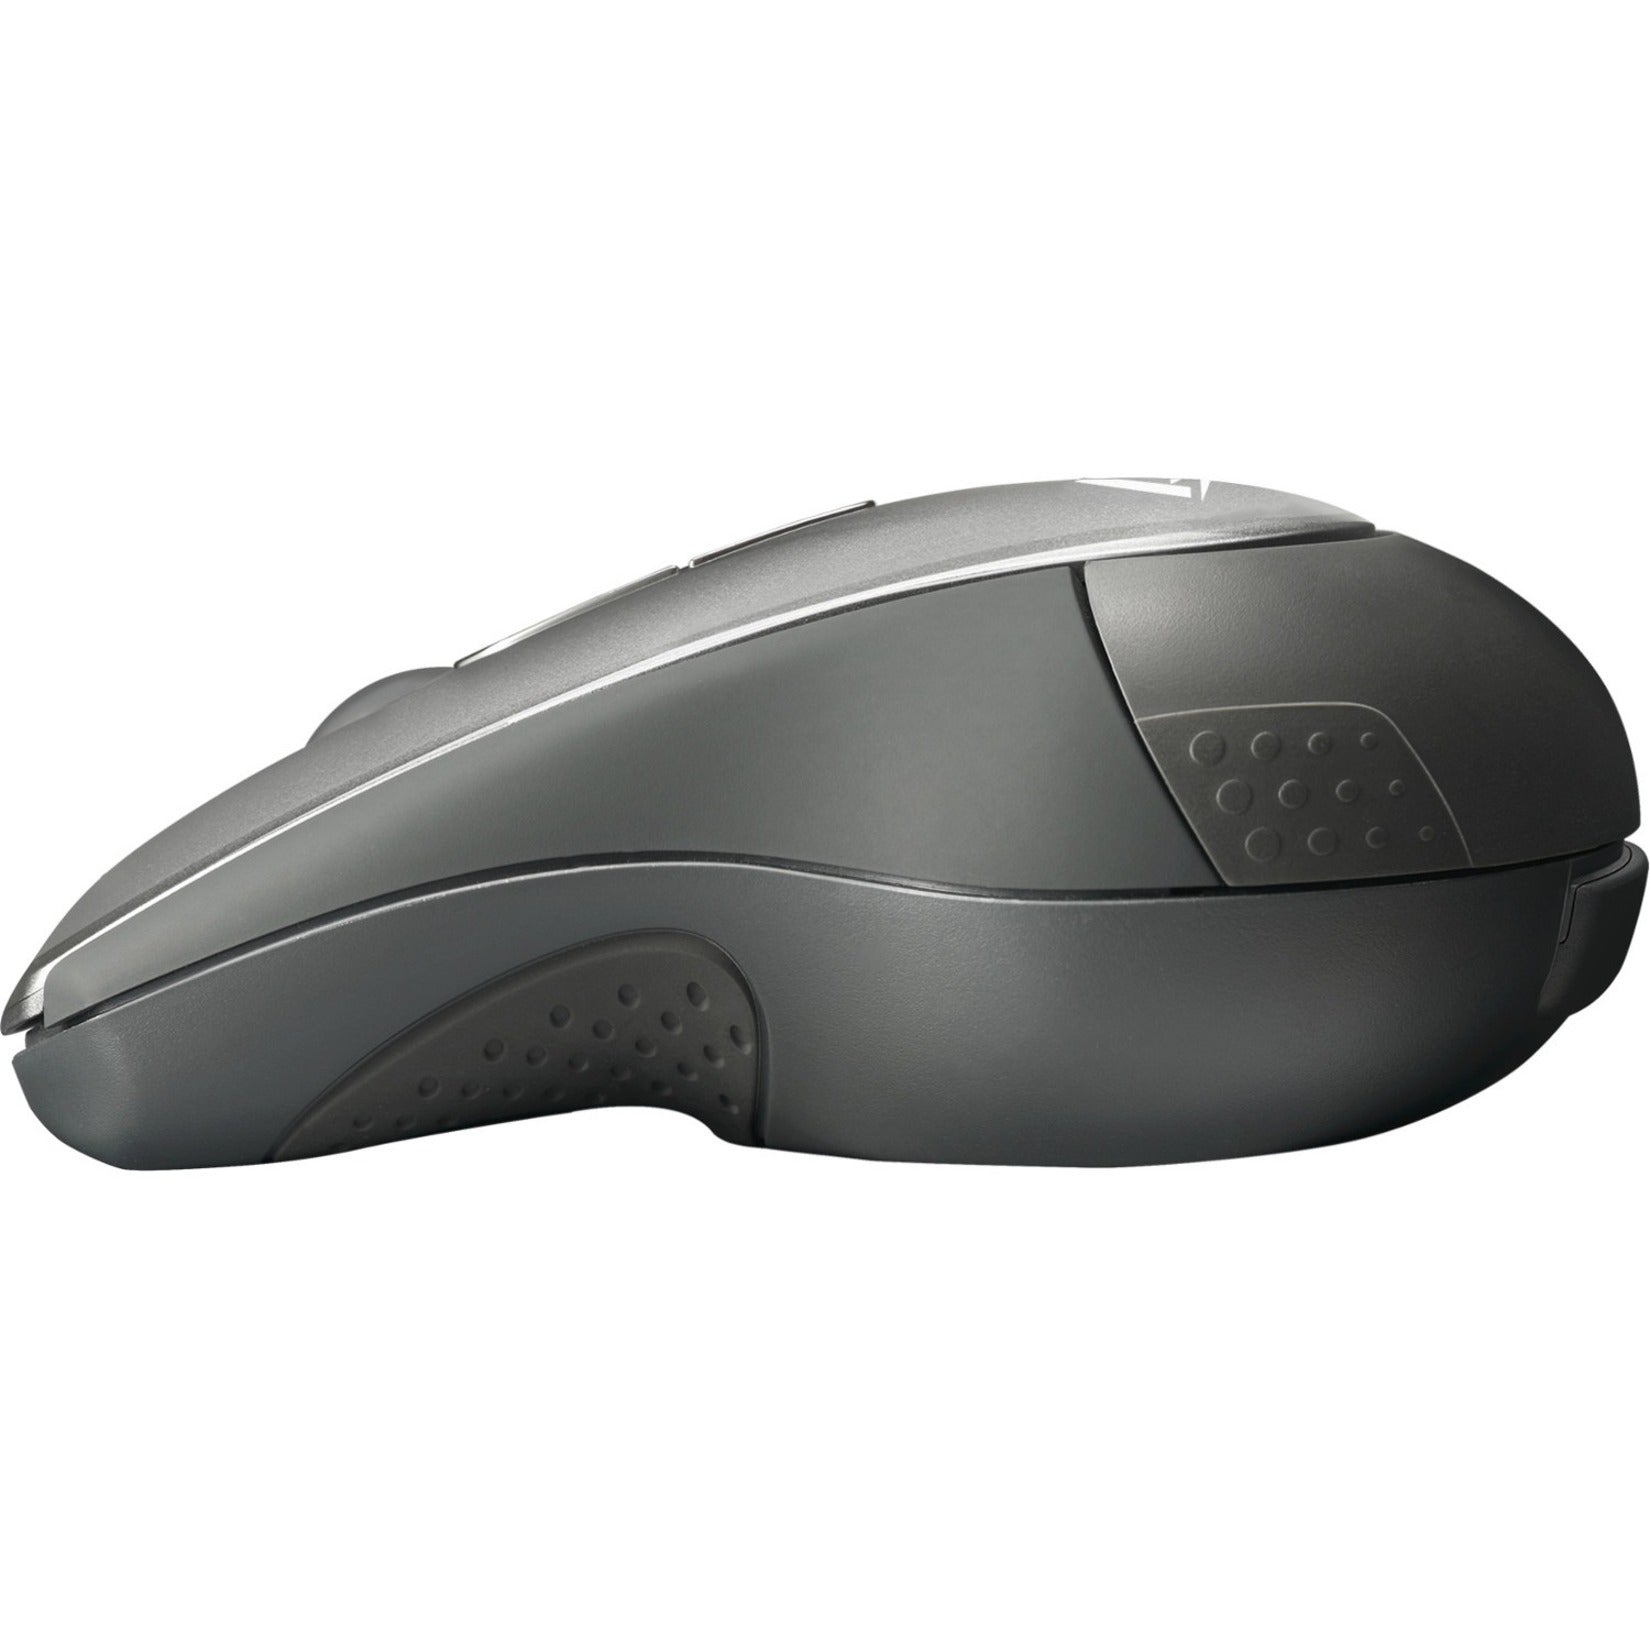 Adesso WKB-5100CB Air Mouse Mobile With Compact Keyboard, Wireless 2.4 GHz, Rechargeable Battery, Quiet Keys, Slim